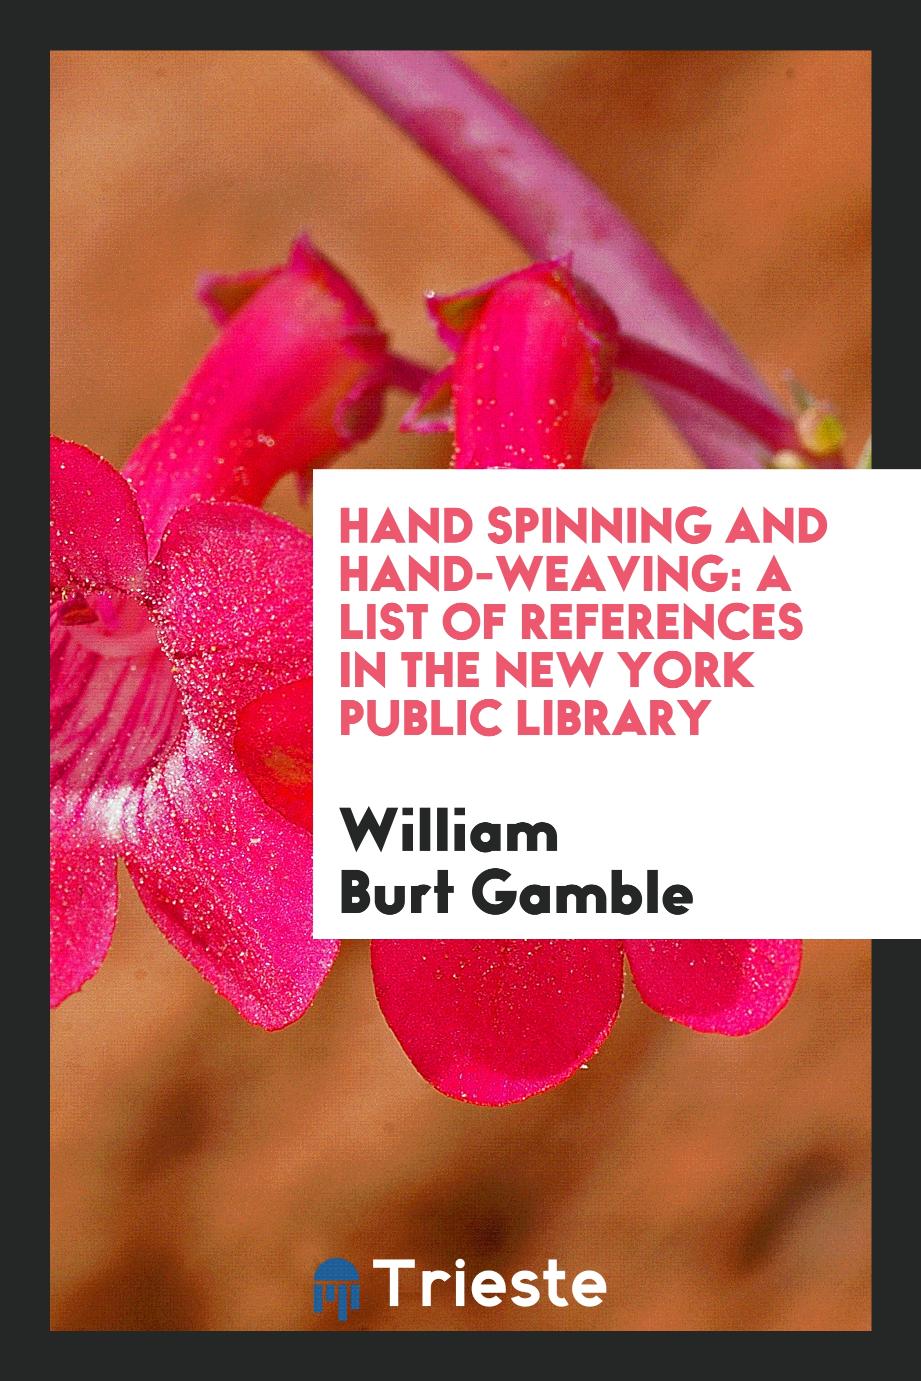 Hand spinning and hand-weaving: a list of references in the New York public library